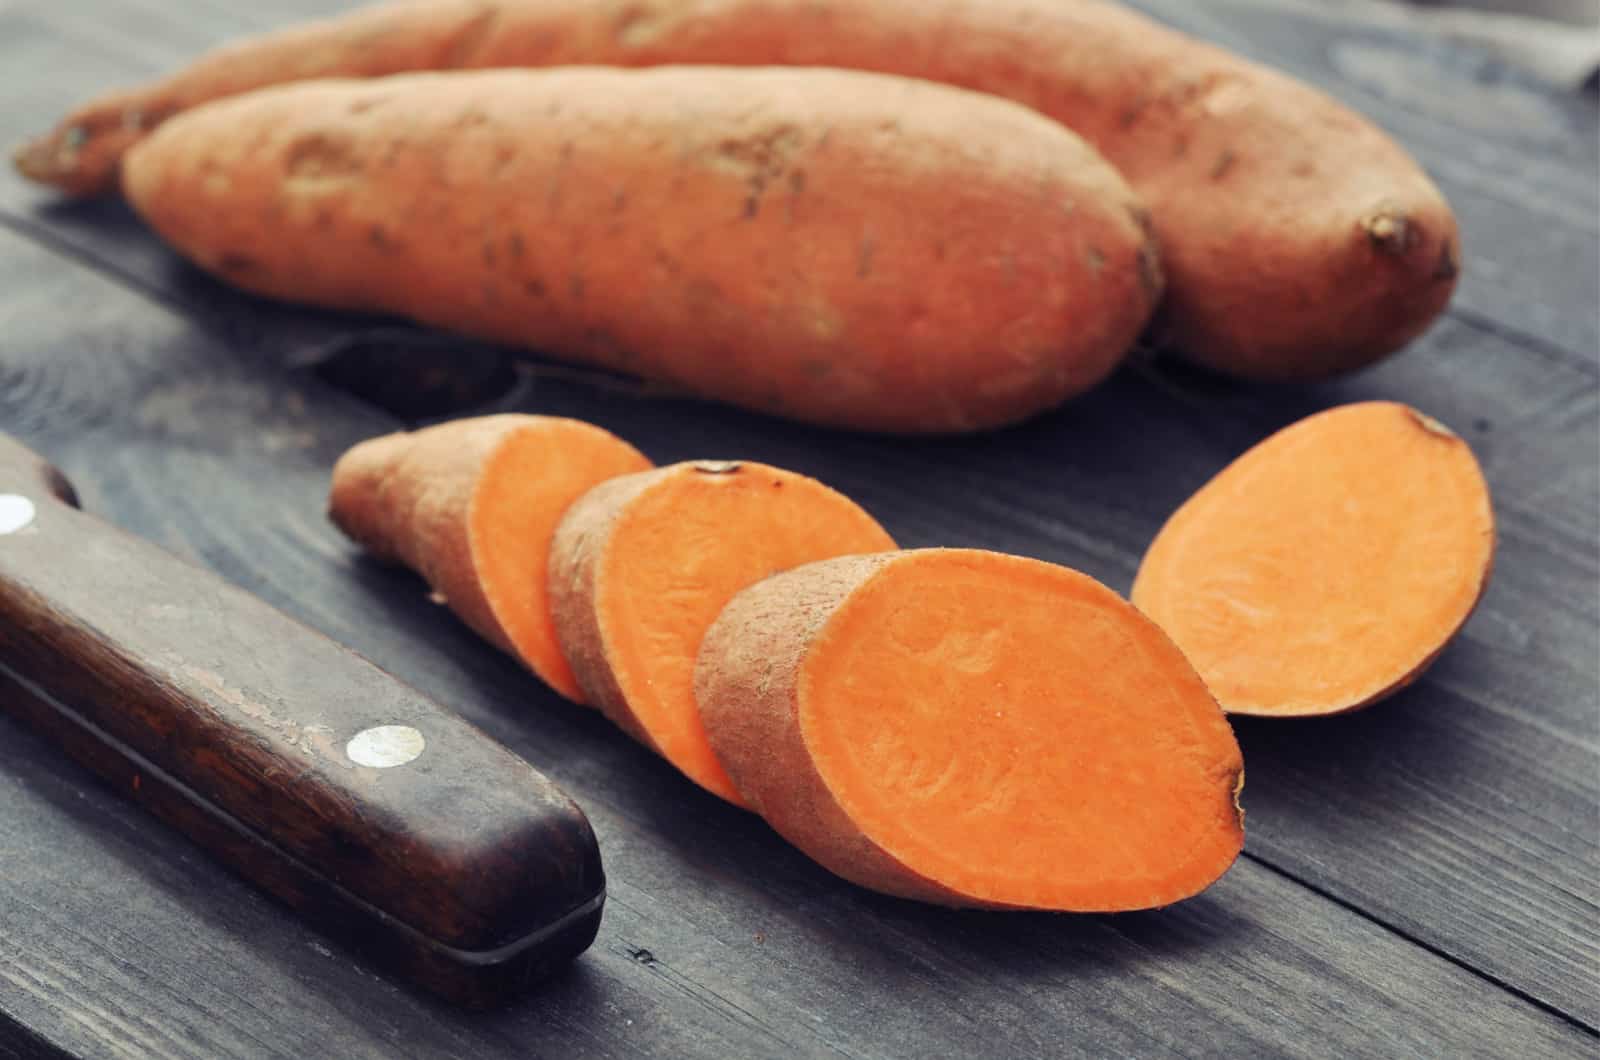 5 Michelin Recipes On How To Cook Sweet Potatoes For Dogs